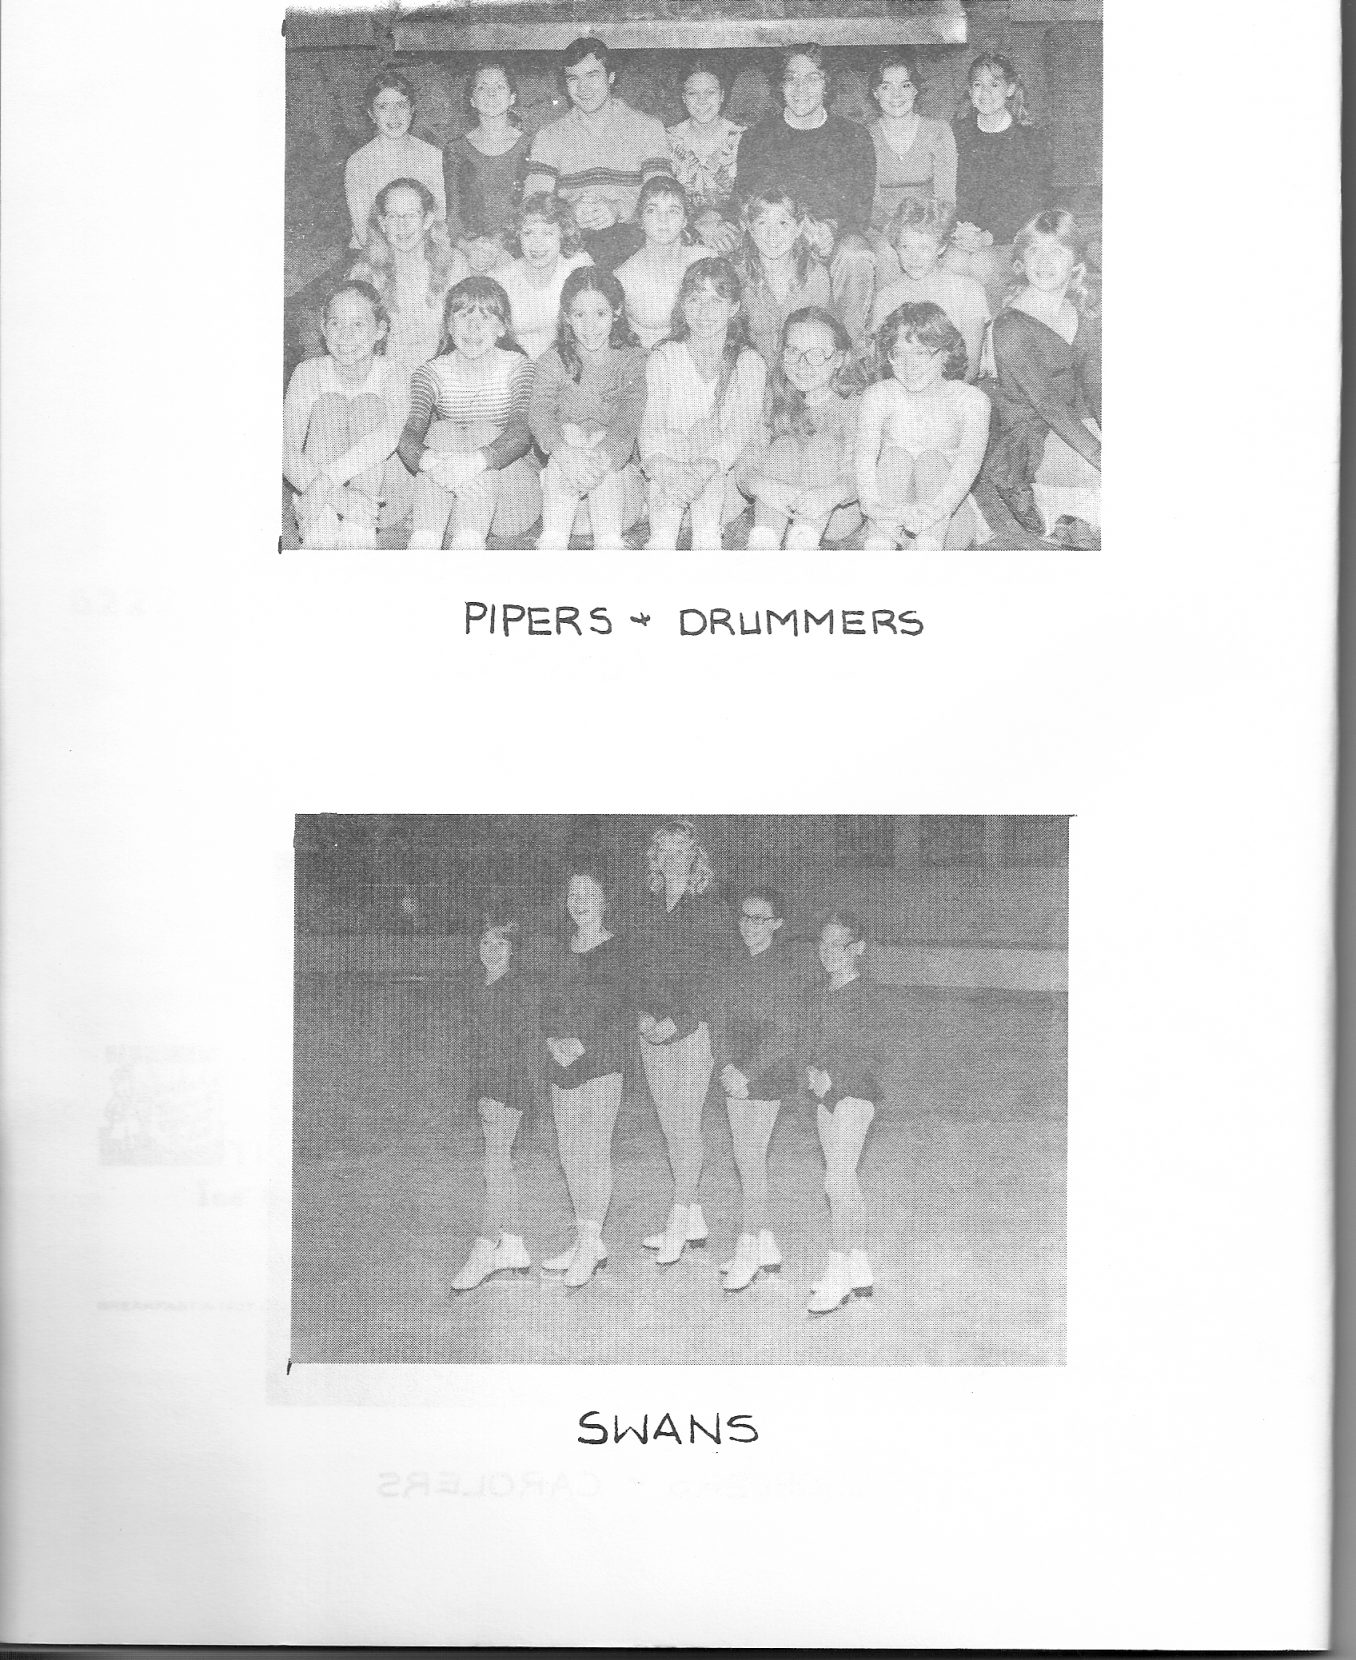 1980s - 12-days-pipers-drummers-swans.jpg